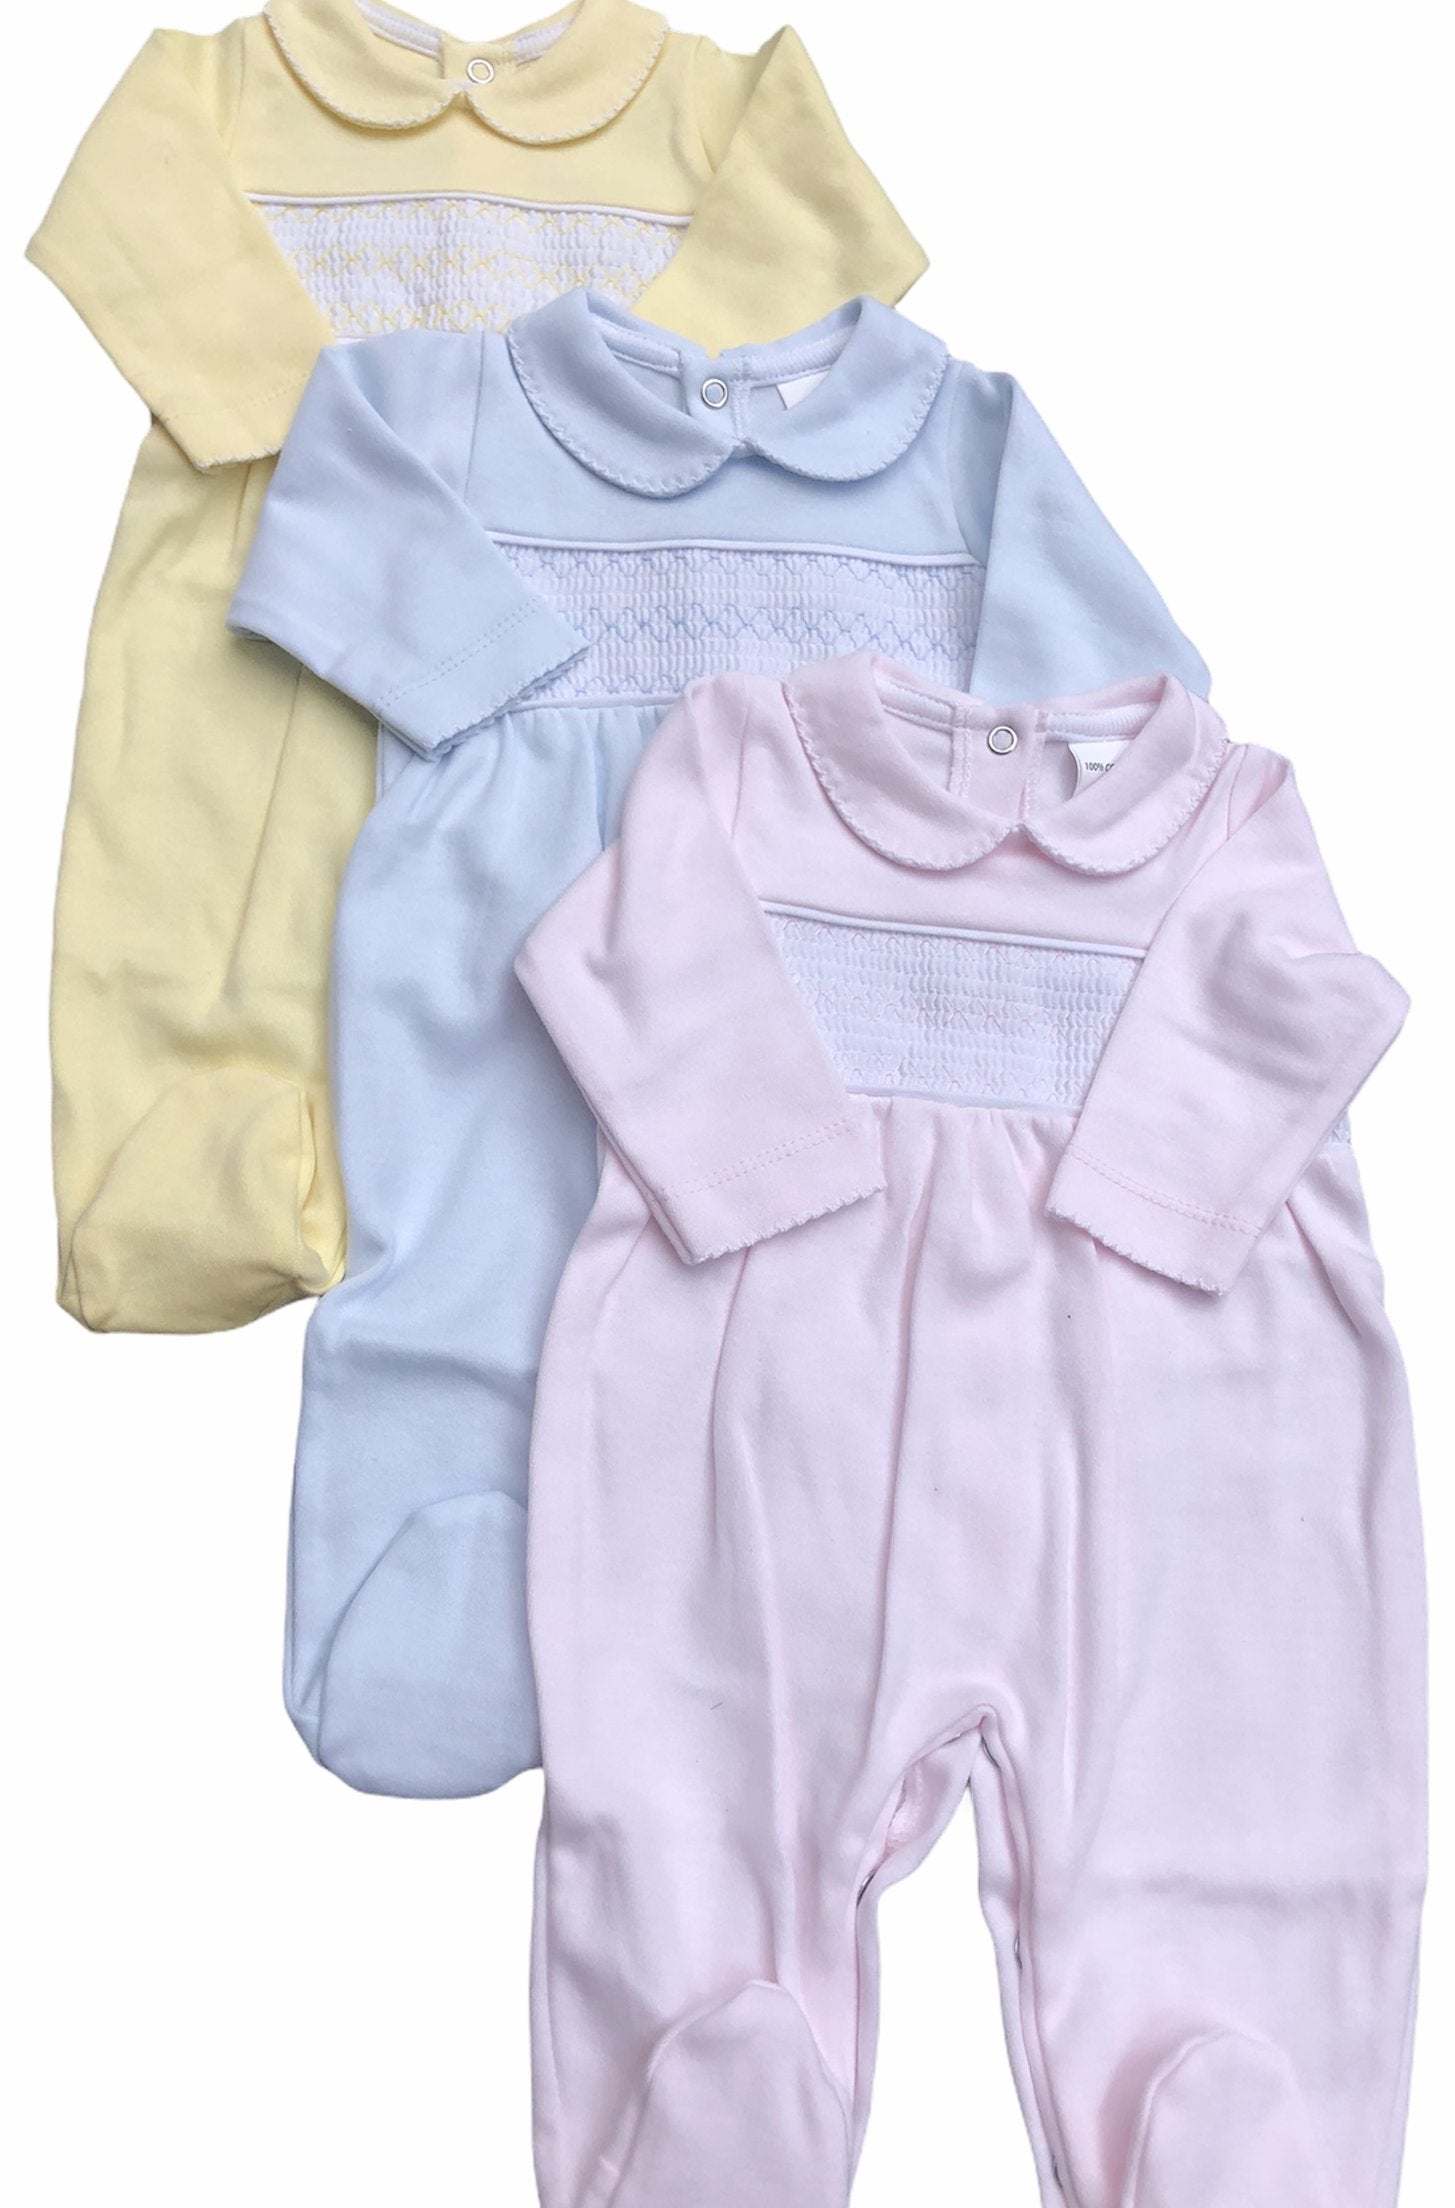 MN002.CB Baby Smocked Smocking Baby grows or blankets